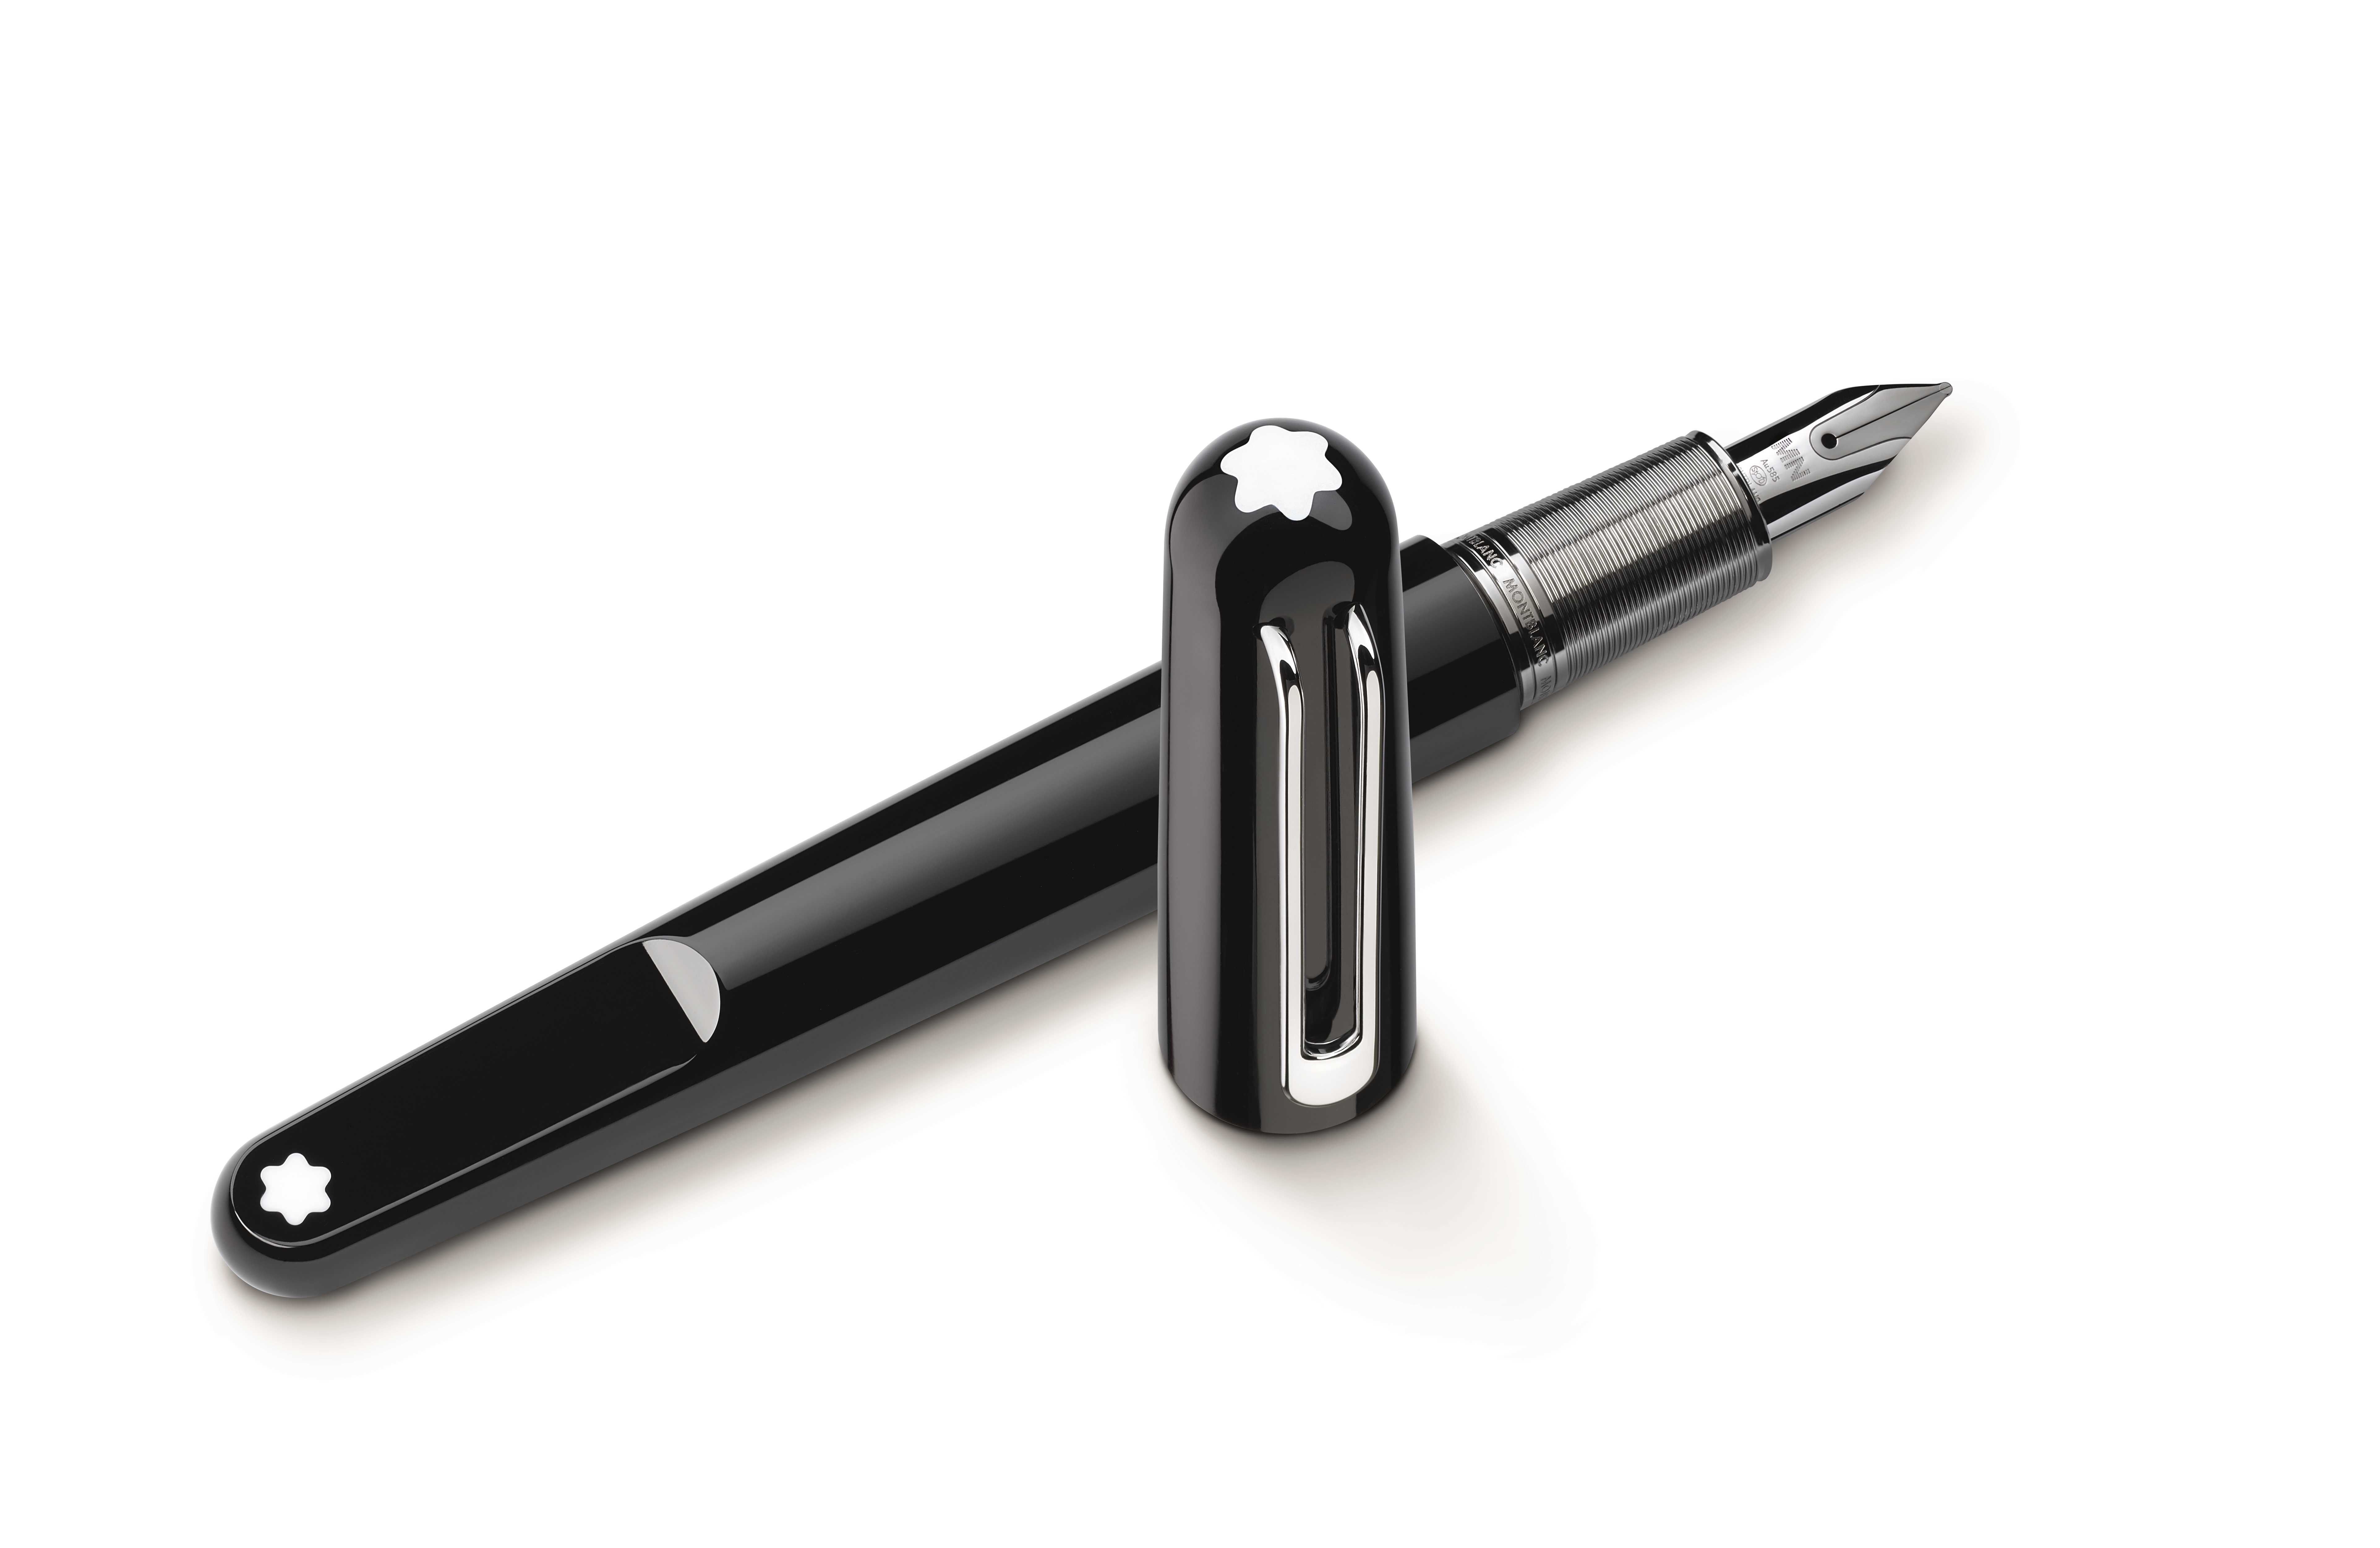 Marc Newson's Montblanc M pen is sleek as can be.